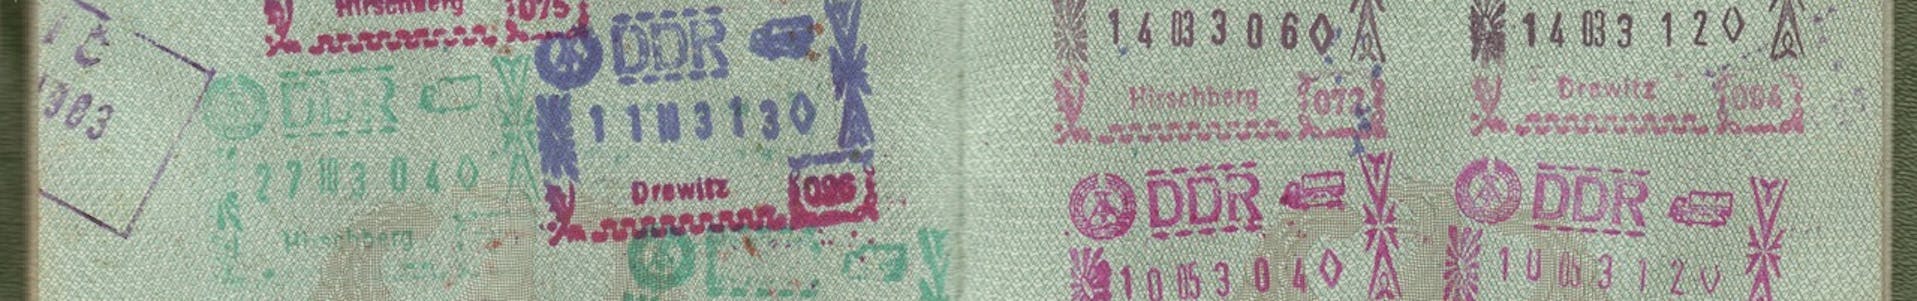 Passport stamps - Immigration Skills Charge